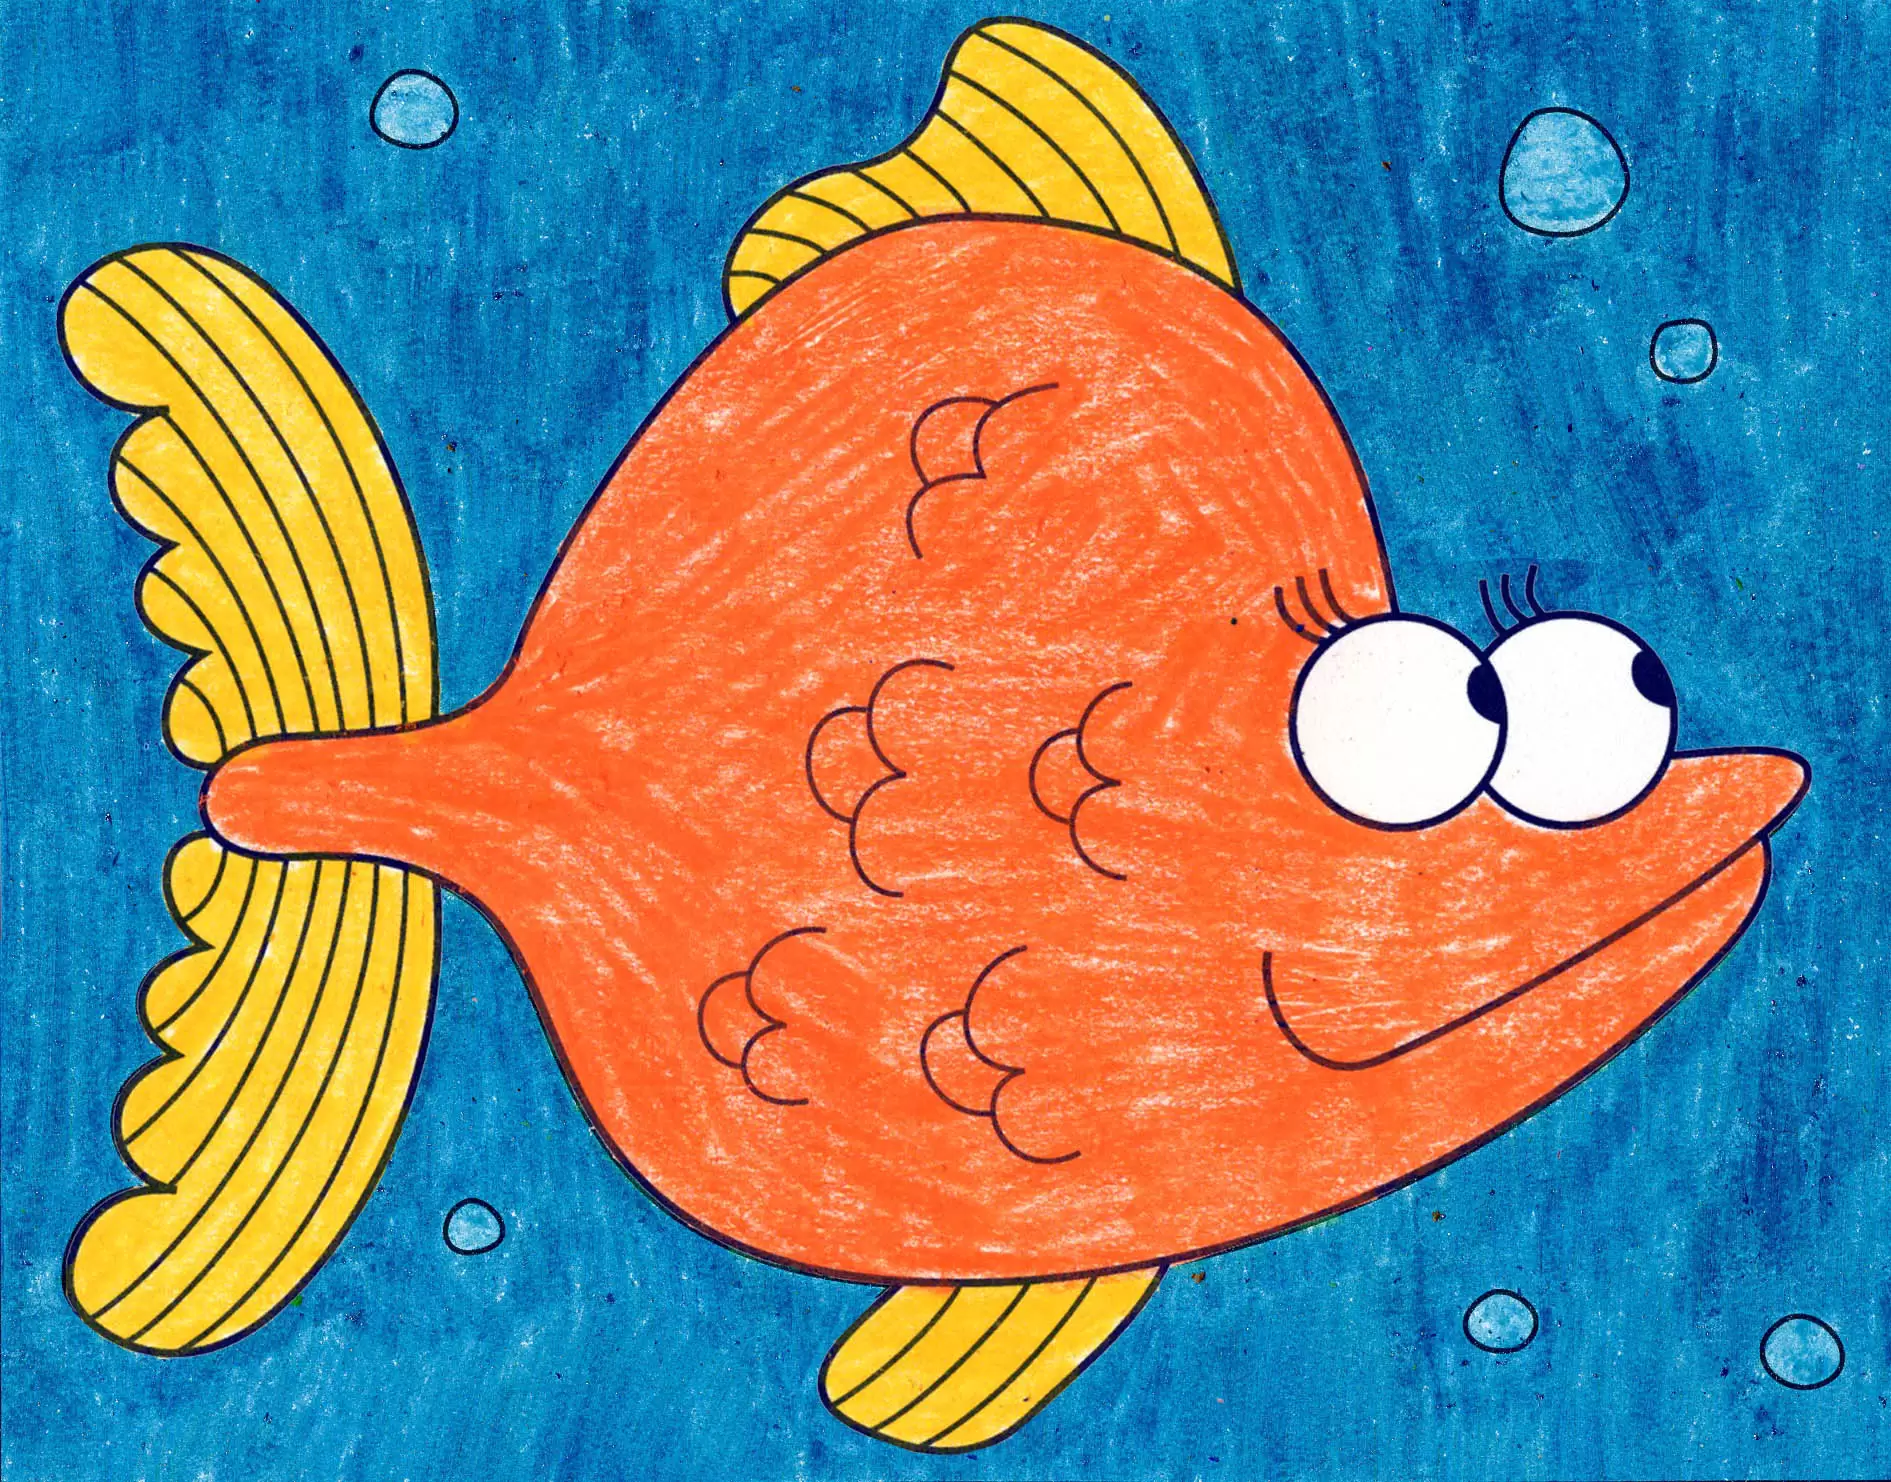 Easy How to Draw a Cartoon Fish Tutorial and Cartoon Fish Coloring Page